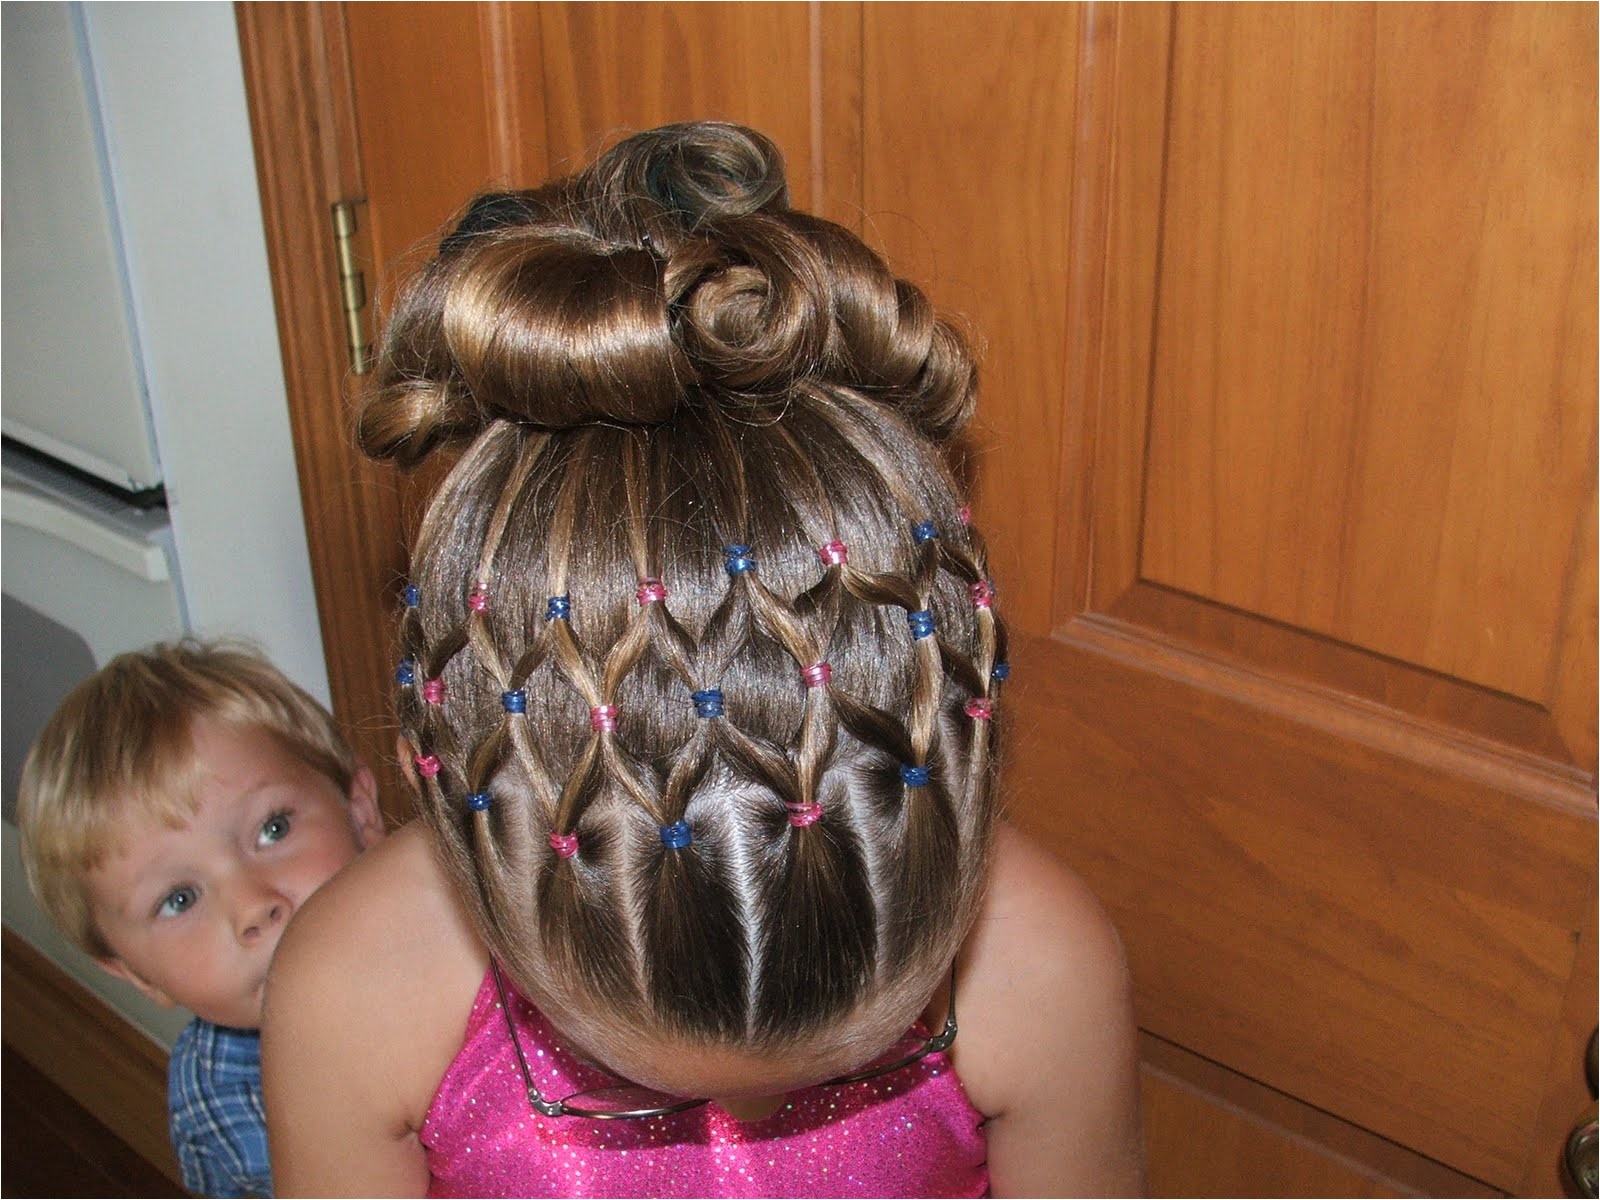 7 Year Old Girl Hairstyles Image New Simple Hairstyles for 4 Year Olds 15 Elegant